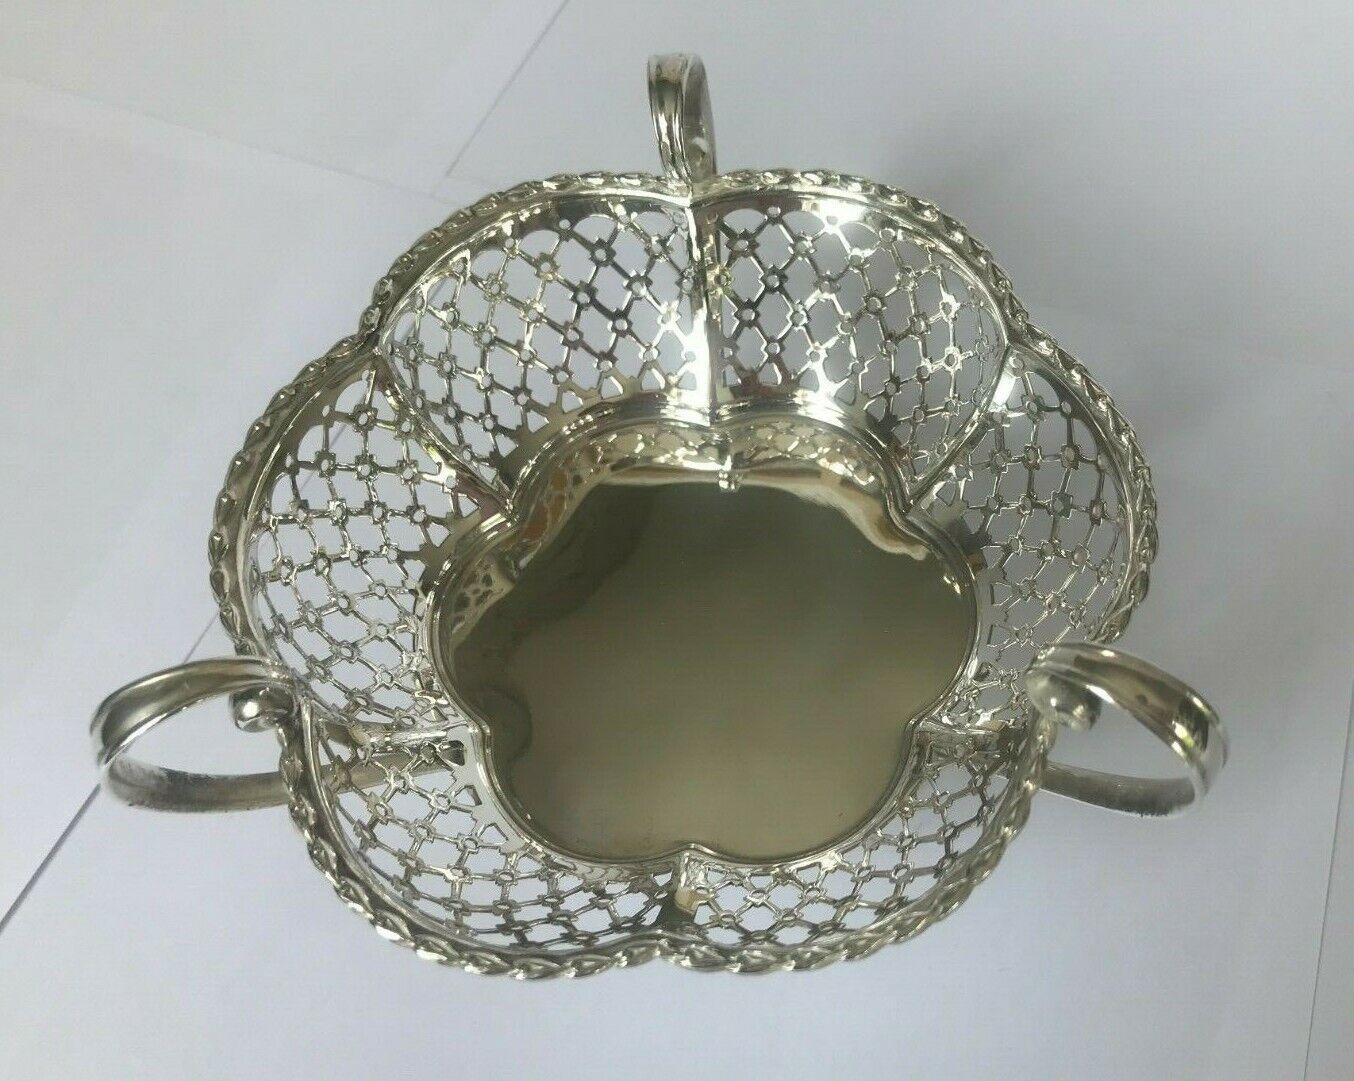 Bonbon Dish in Sterling Silver by Synyer & Beddoes, 1910 For Sale 4